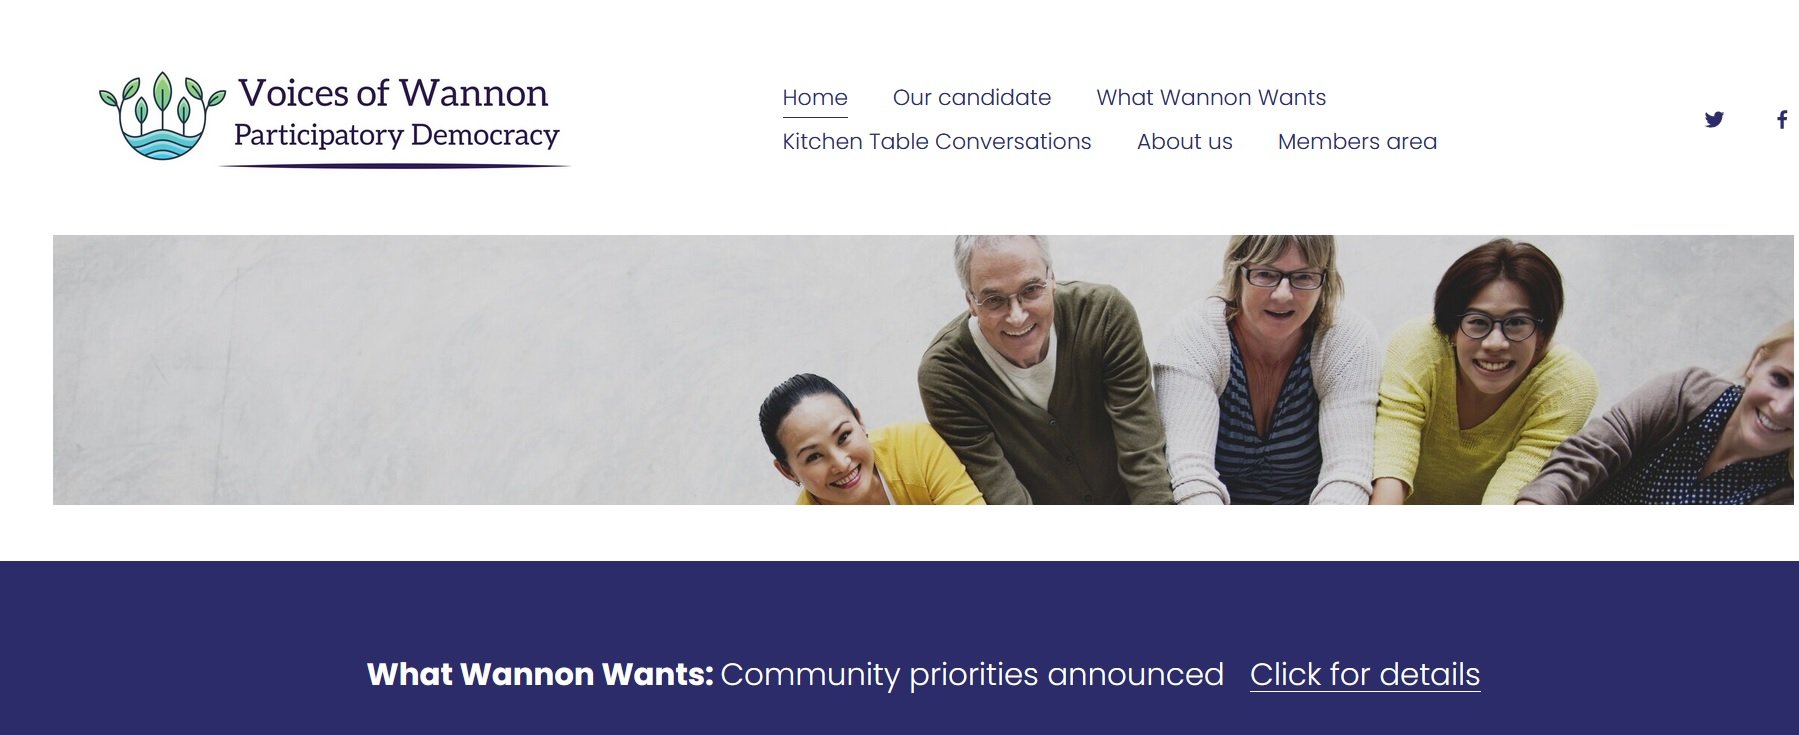 Screenshot from website Voices of Wannon